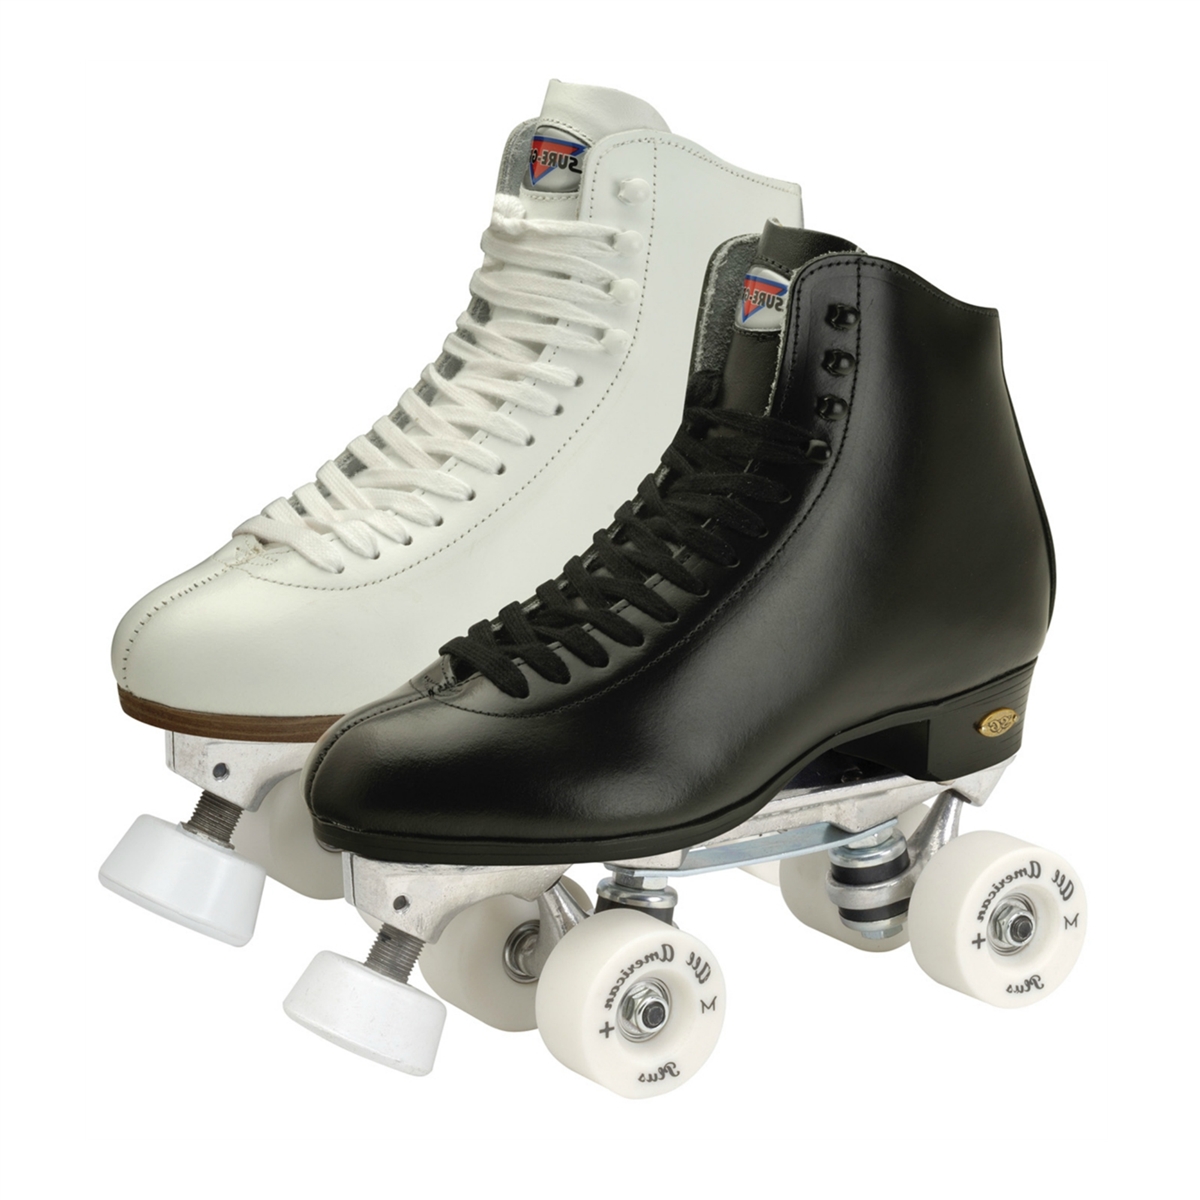 The American Roller Skates | Connie's Skate Place